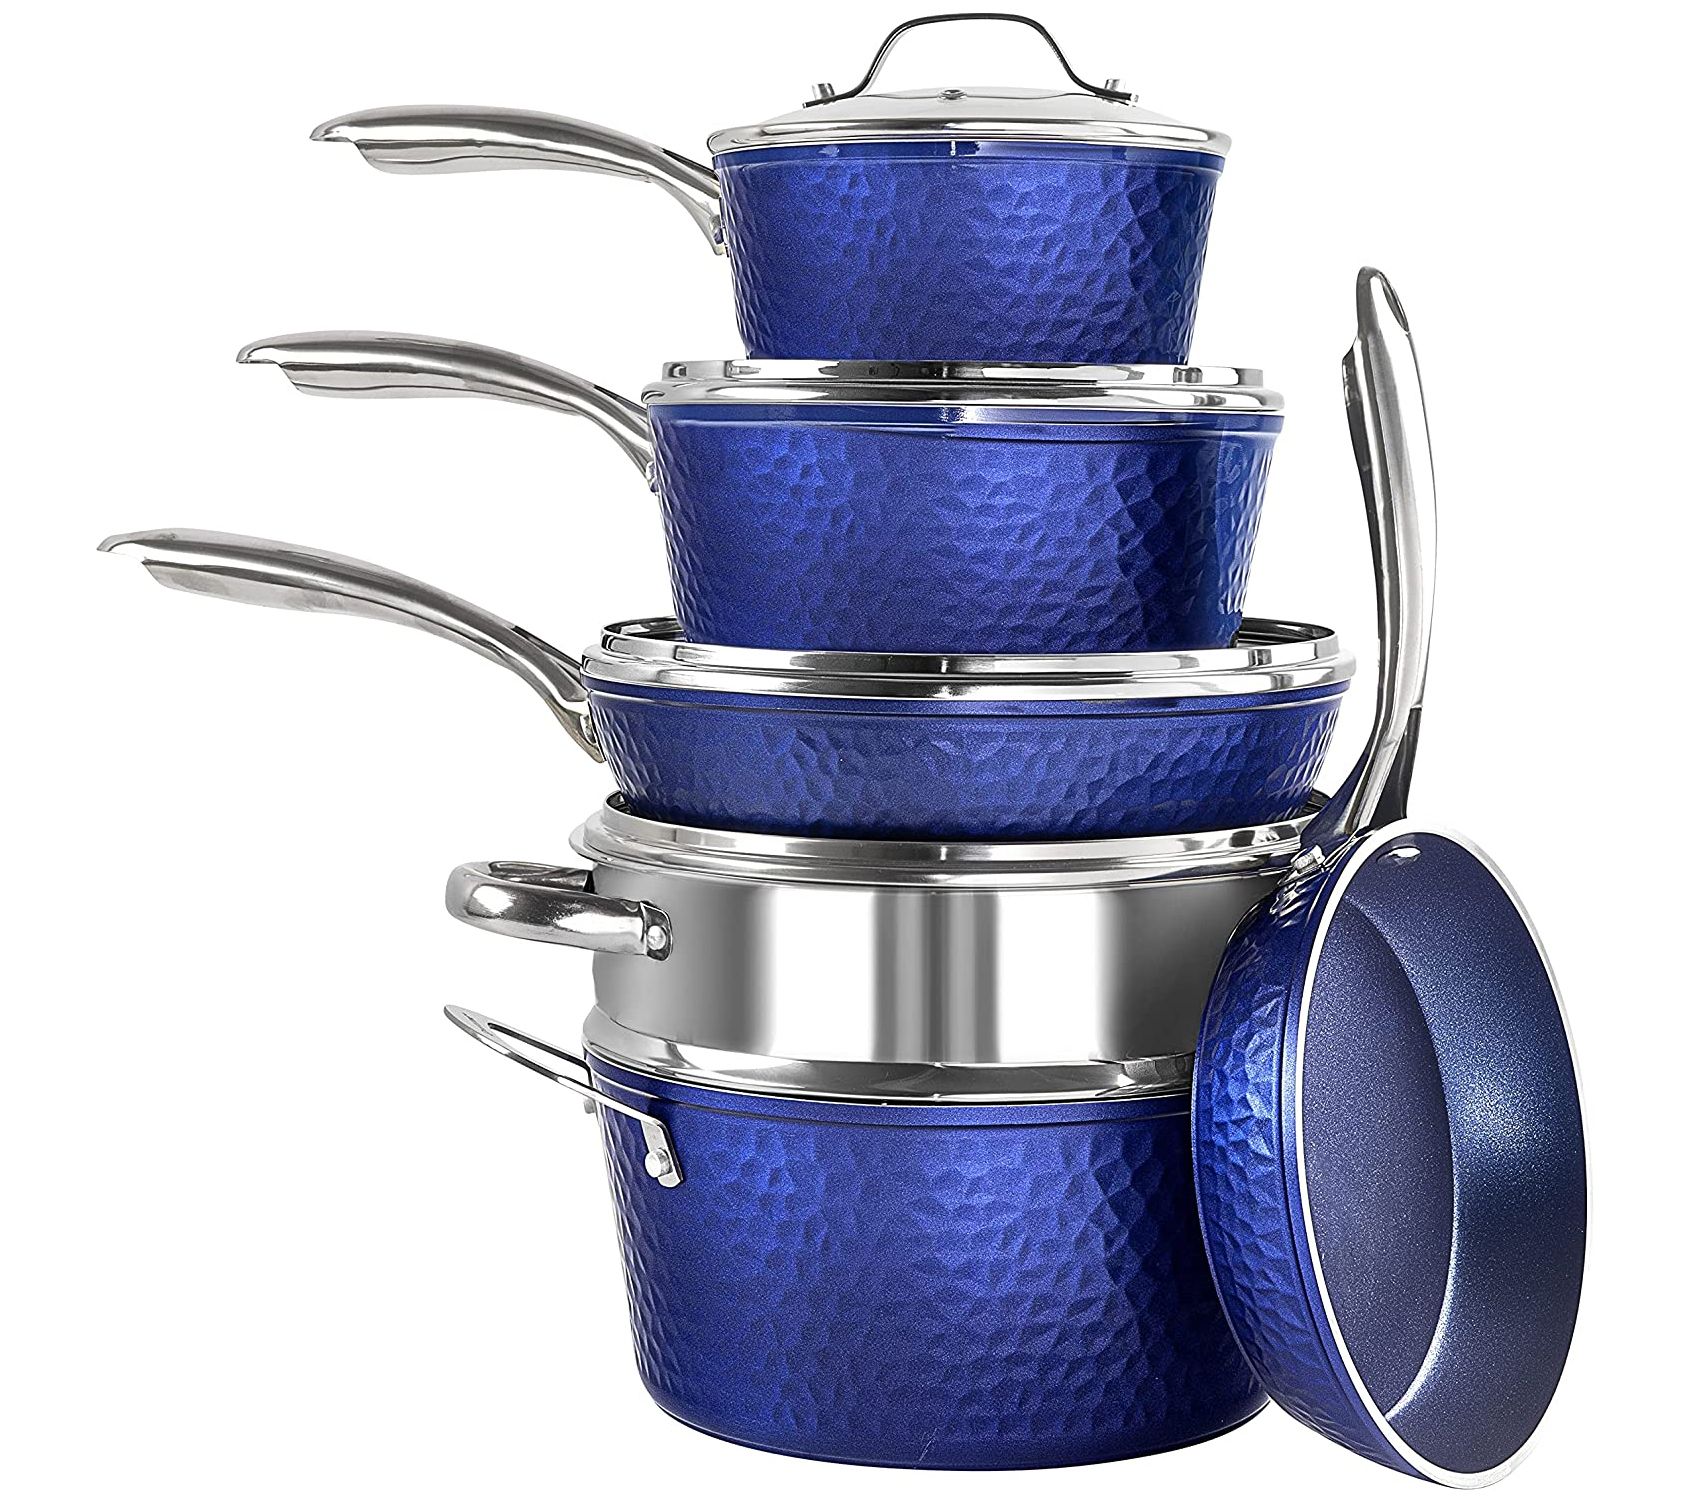 15 Piece Hammered Cookware Set Nonstick Granite Coated Pots and Pans Set  Blue